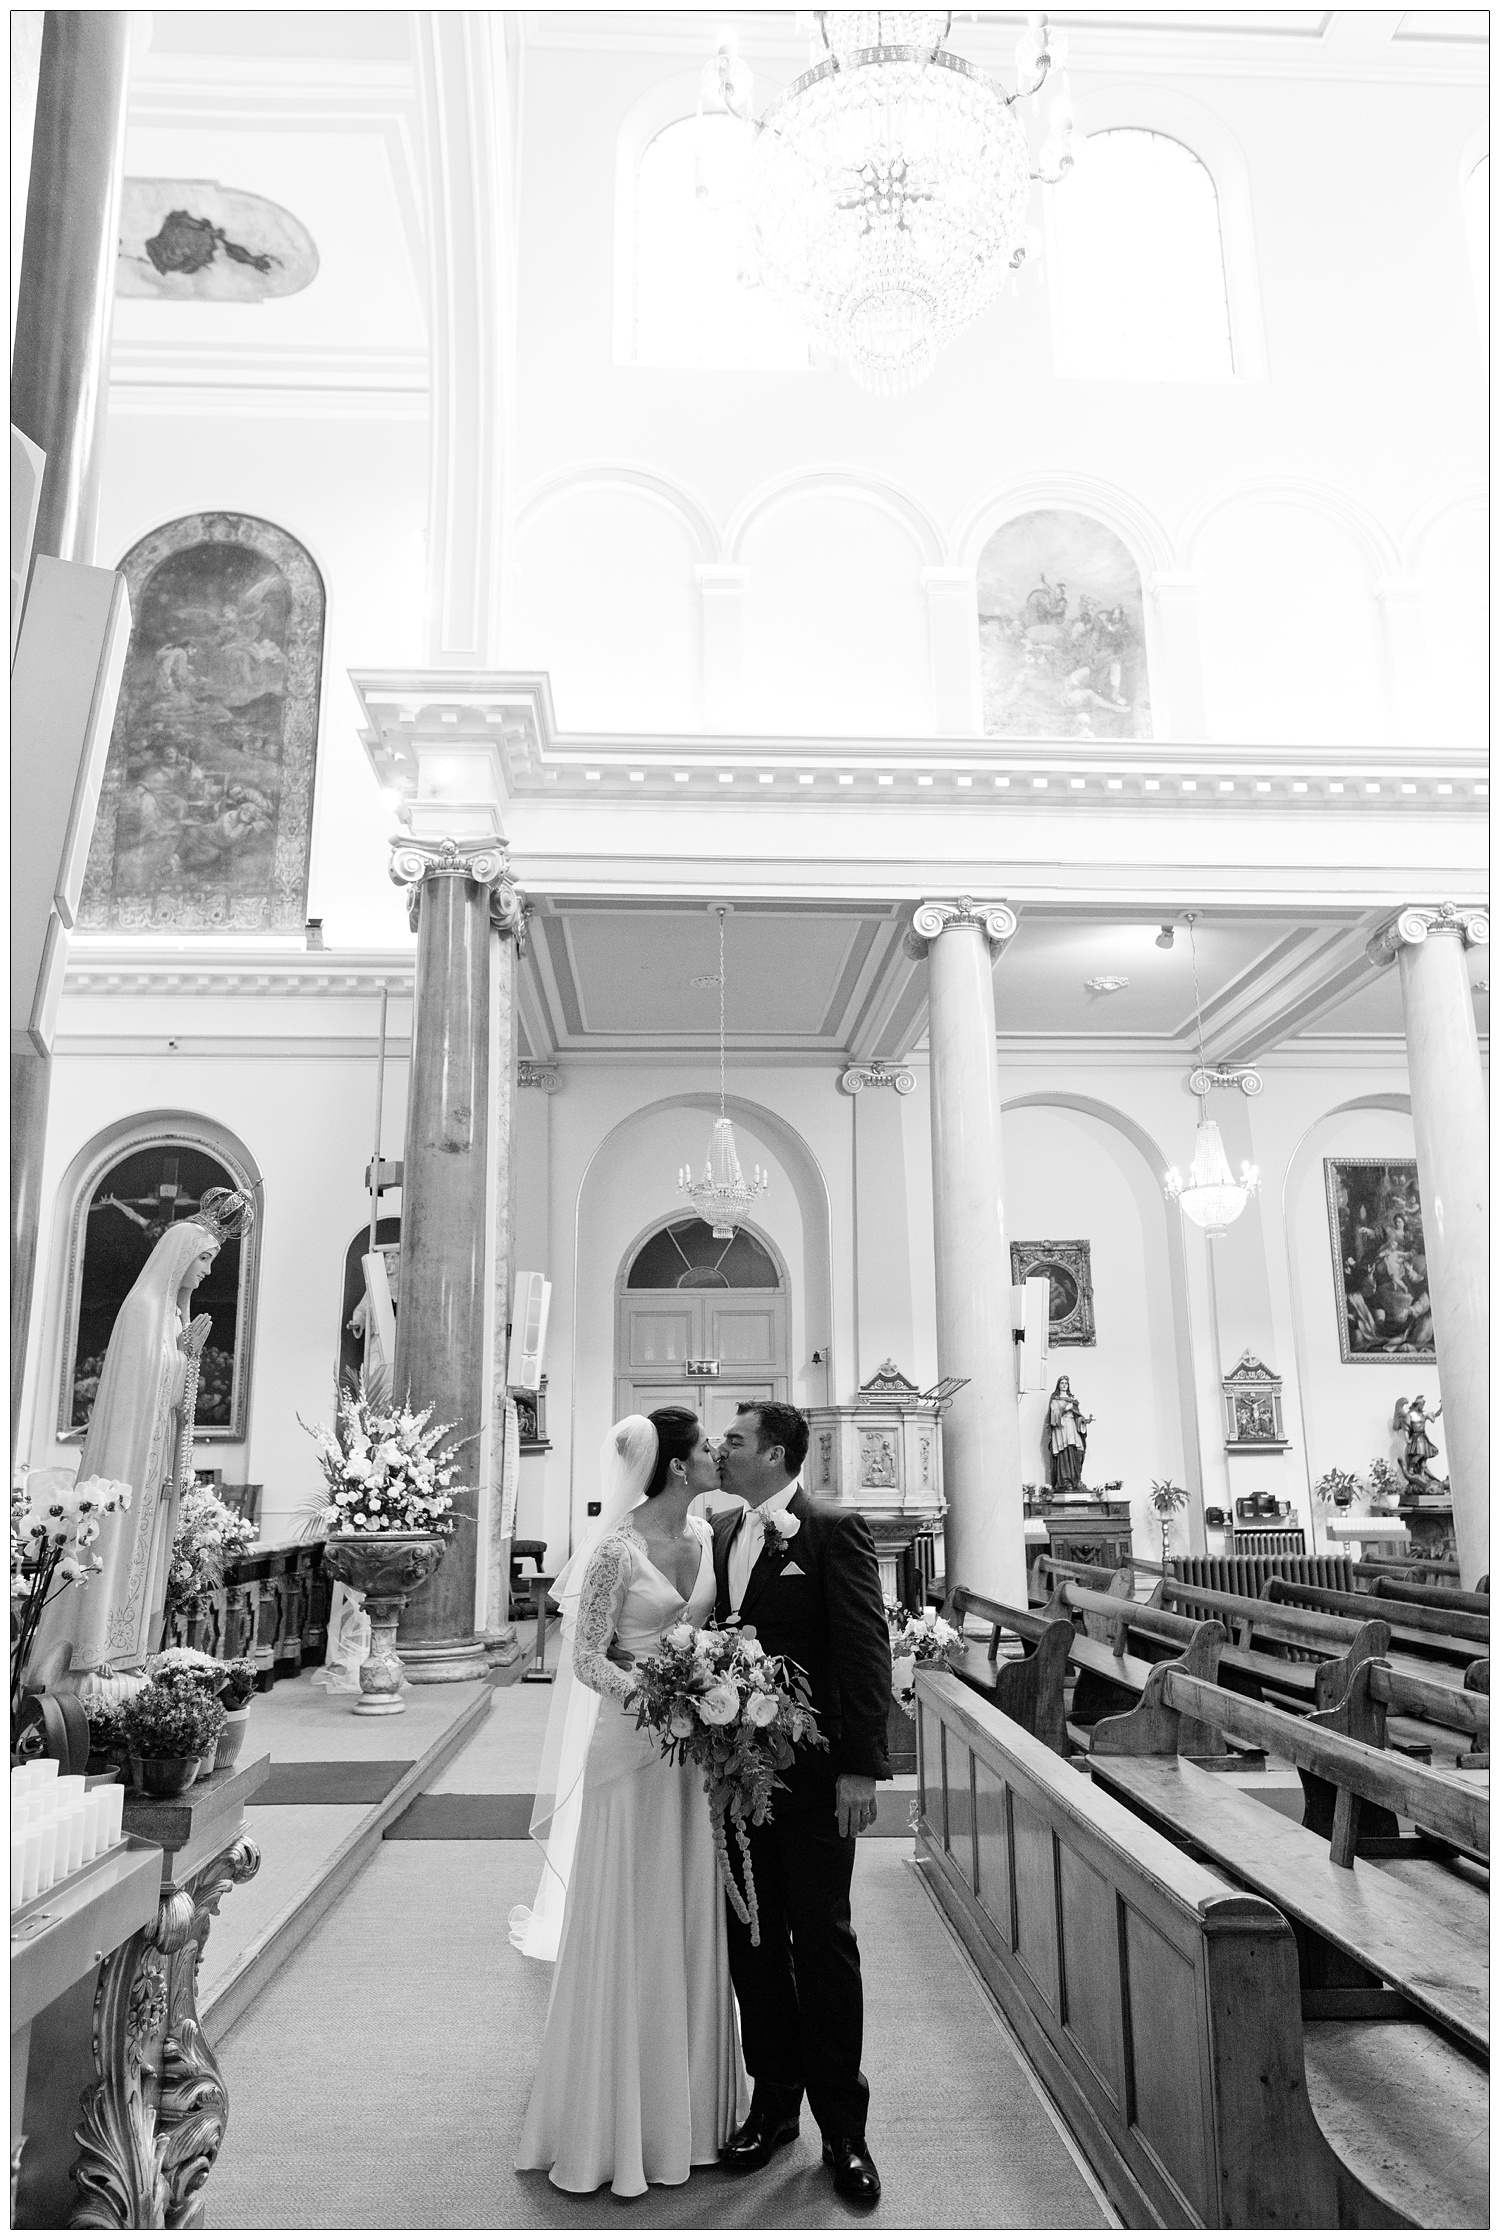 Bride in a long white wedding dress and veil kisses her husband in the St. Peter's Italian Church in Clerkenwell.